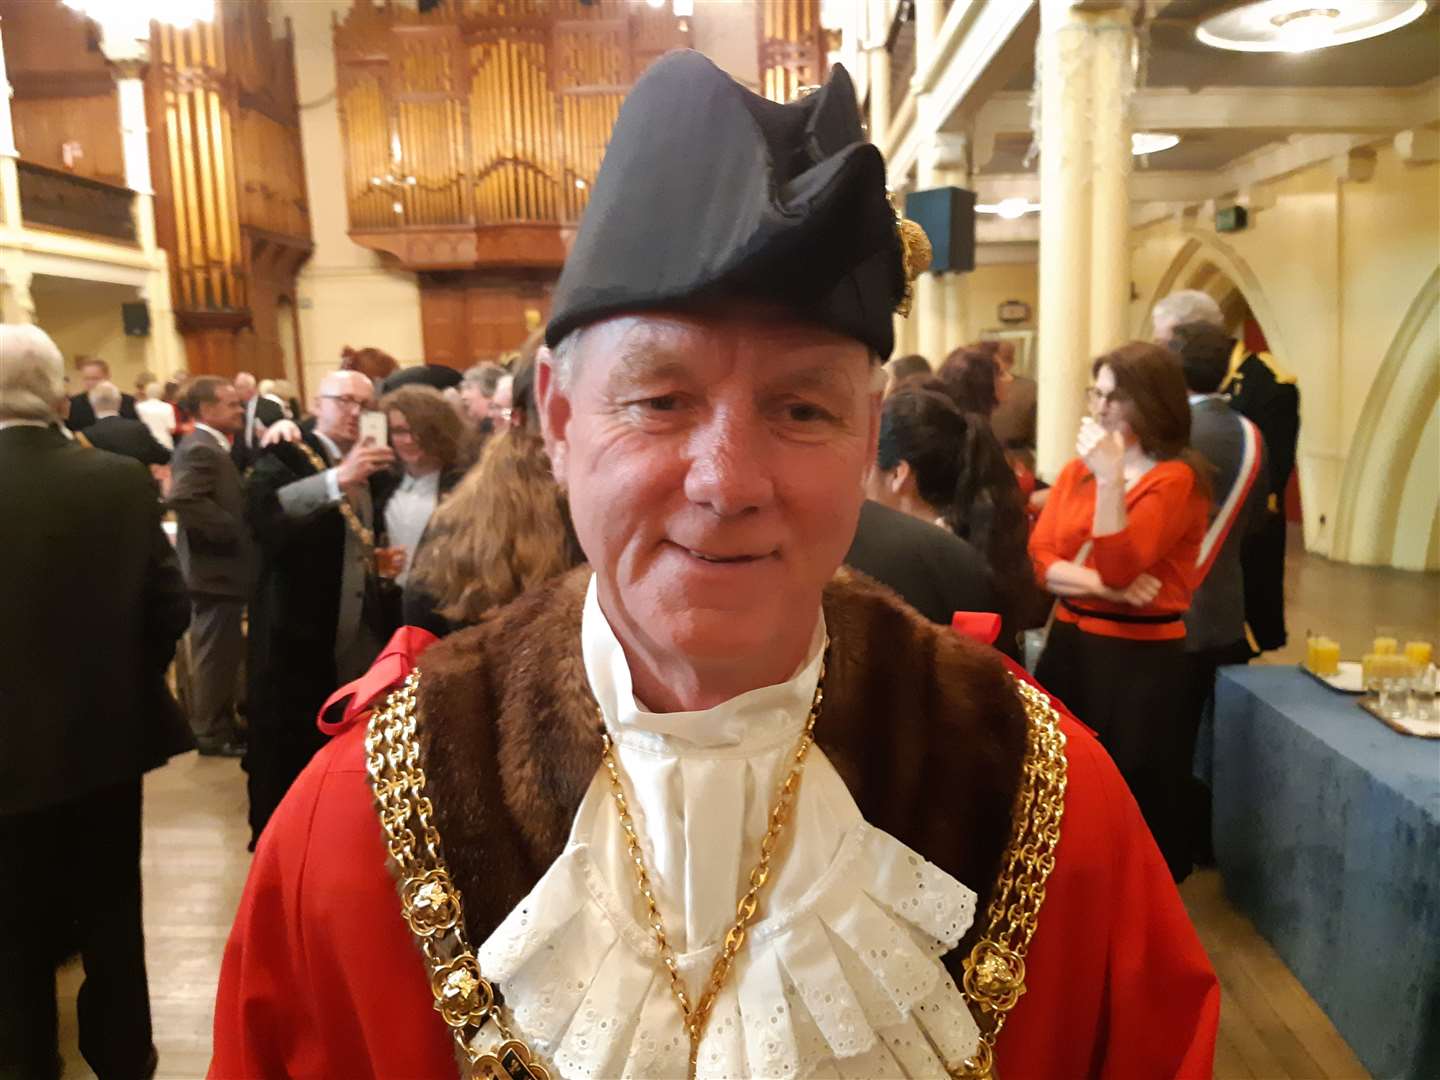 Gordon Cowan on a previous election as mayor in 2019. Picture: Sam Lennon